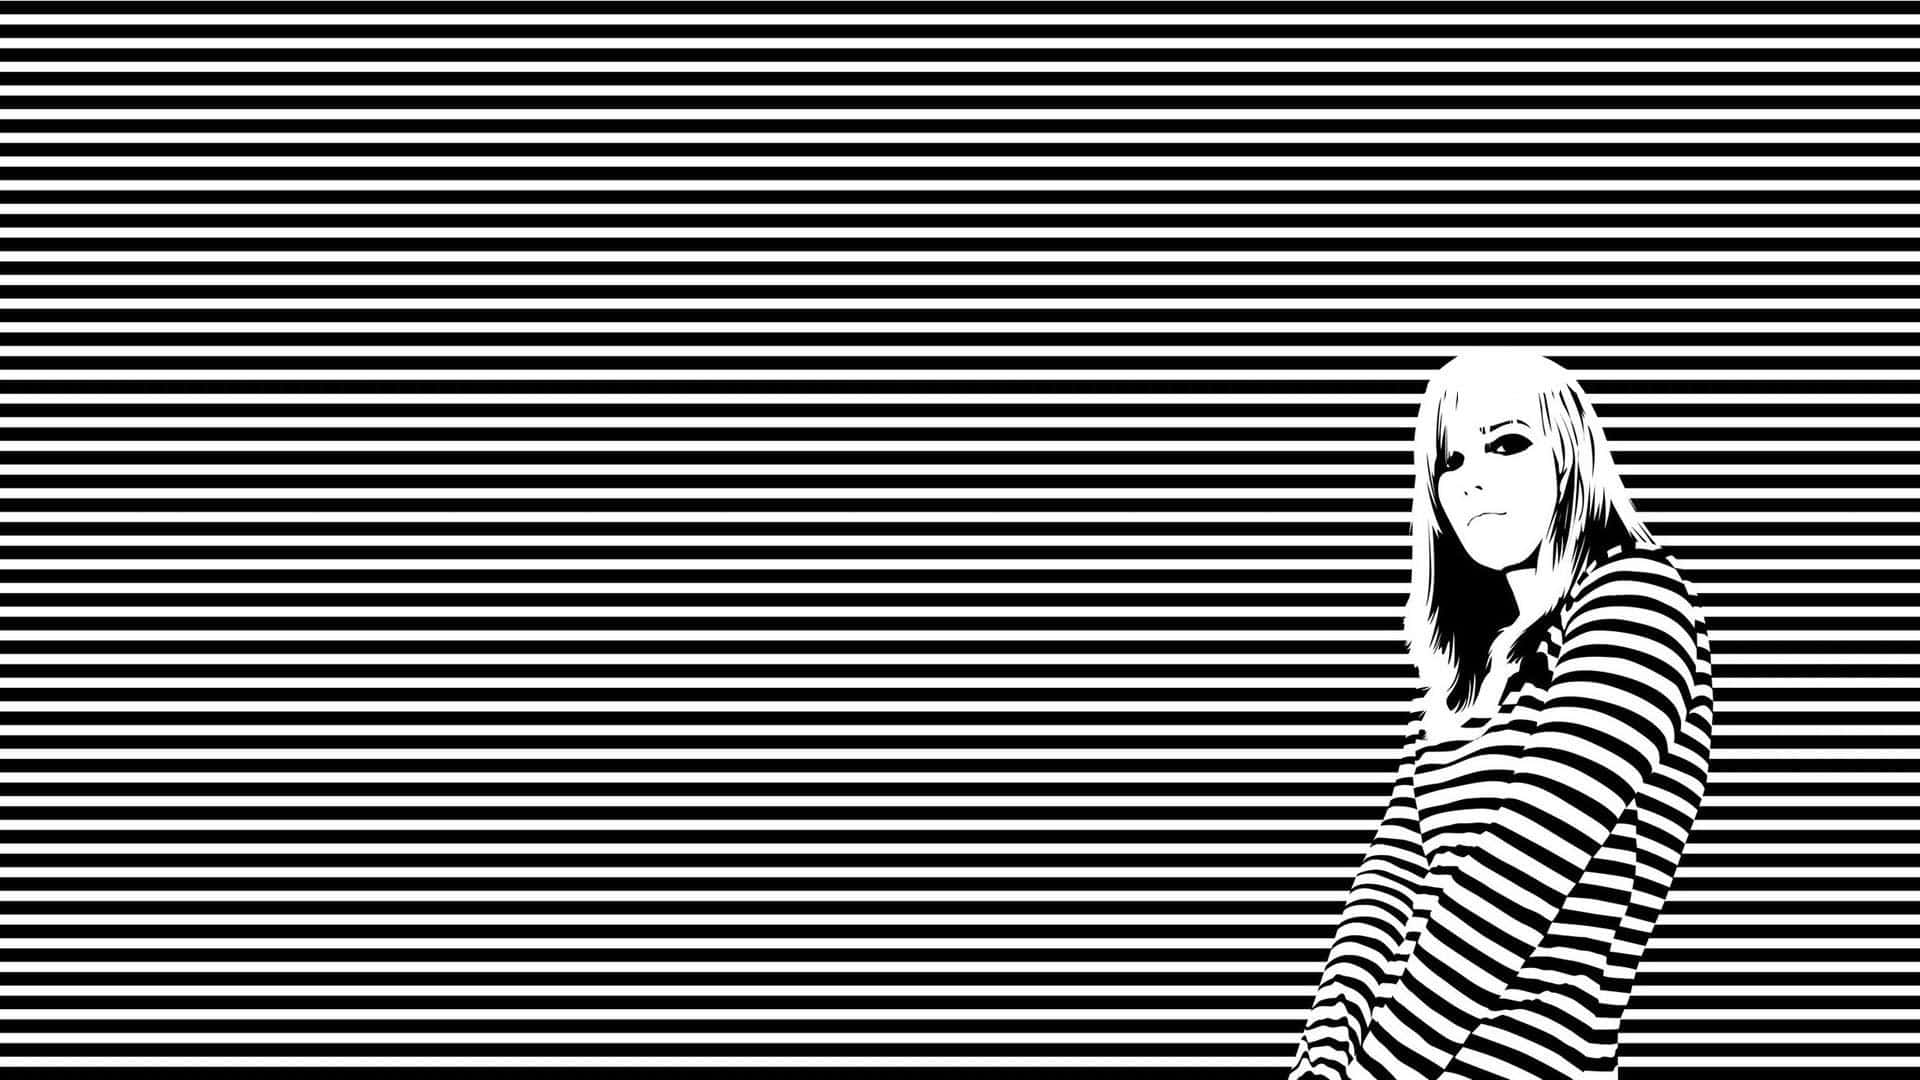 Woman In Black And White Stripes Background